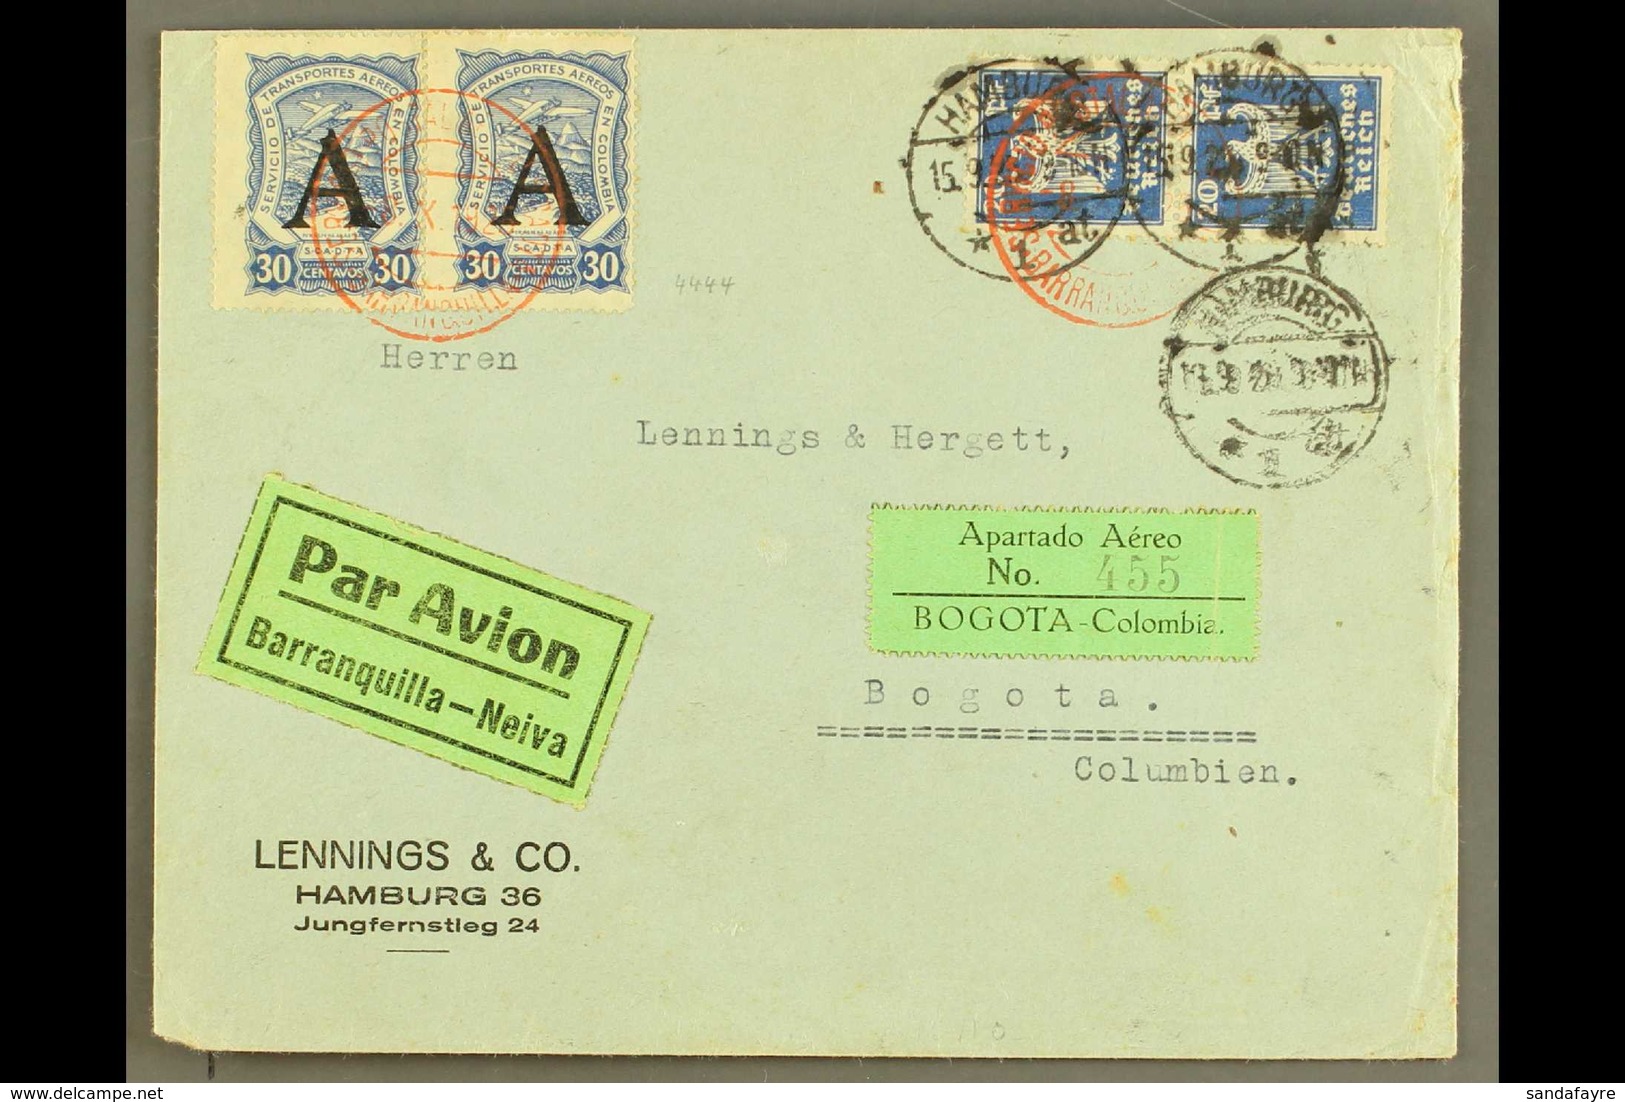 SCADTA 1925 (15 Sep) Cover From Germany Addressed To Bogota, Bearing Germany 20pf Pair Tied By "Hamburg" Cds's And SCADT - Kolumbien